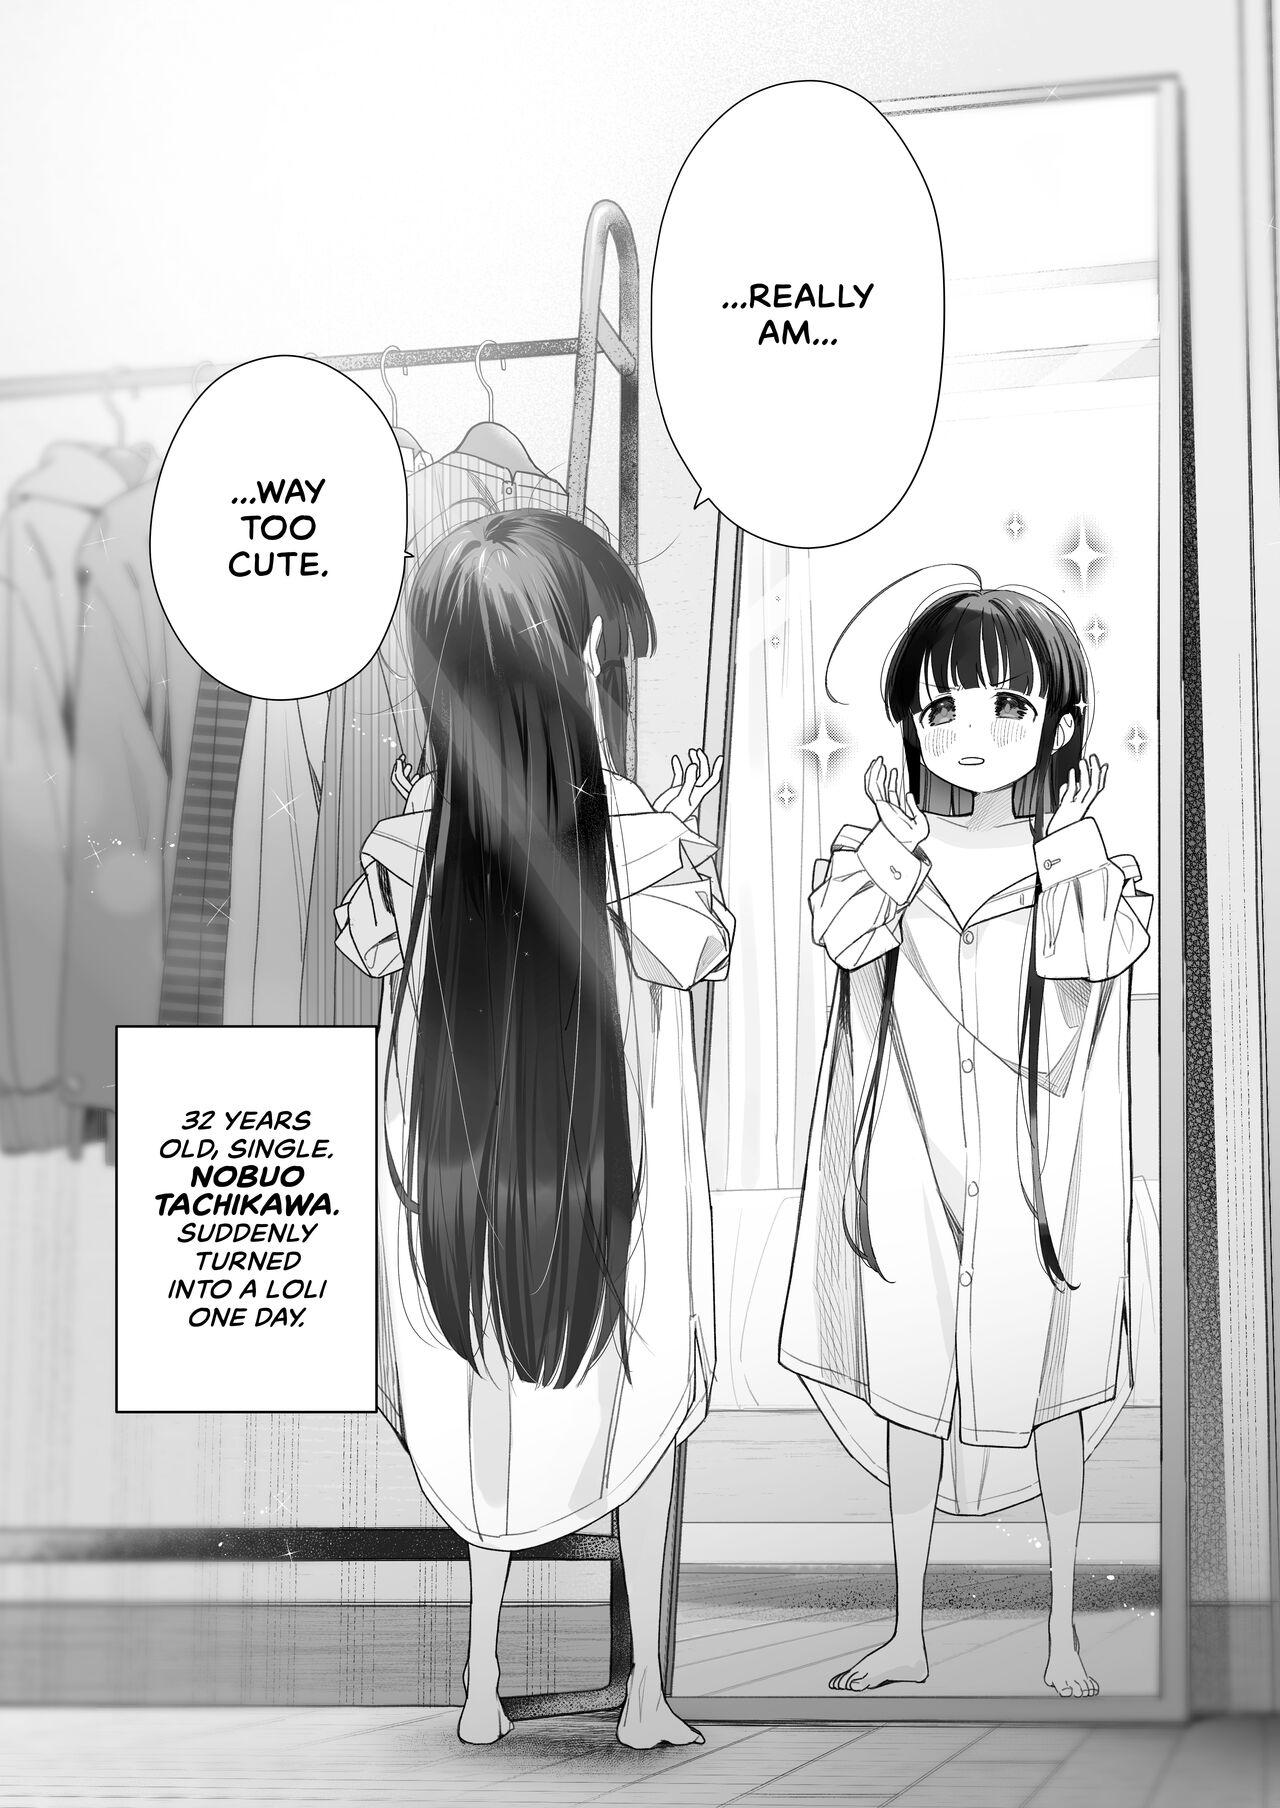 Lima [Asunaro Neat. (Ronna)] TS Loli Oji-san no Bouken Onanie Hen | The Adventures of an Old Man Who Was Gender-Swapped Into a Loli ~Masturbation Chapter~ [English] [CulturedCommissions] [Digital] - Original Black Gay - Picture 3